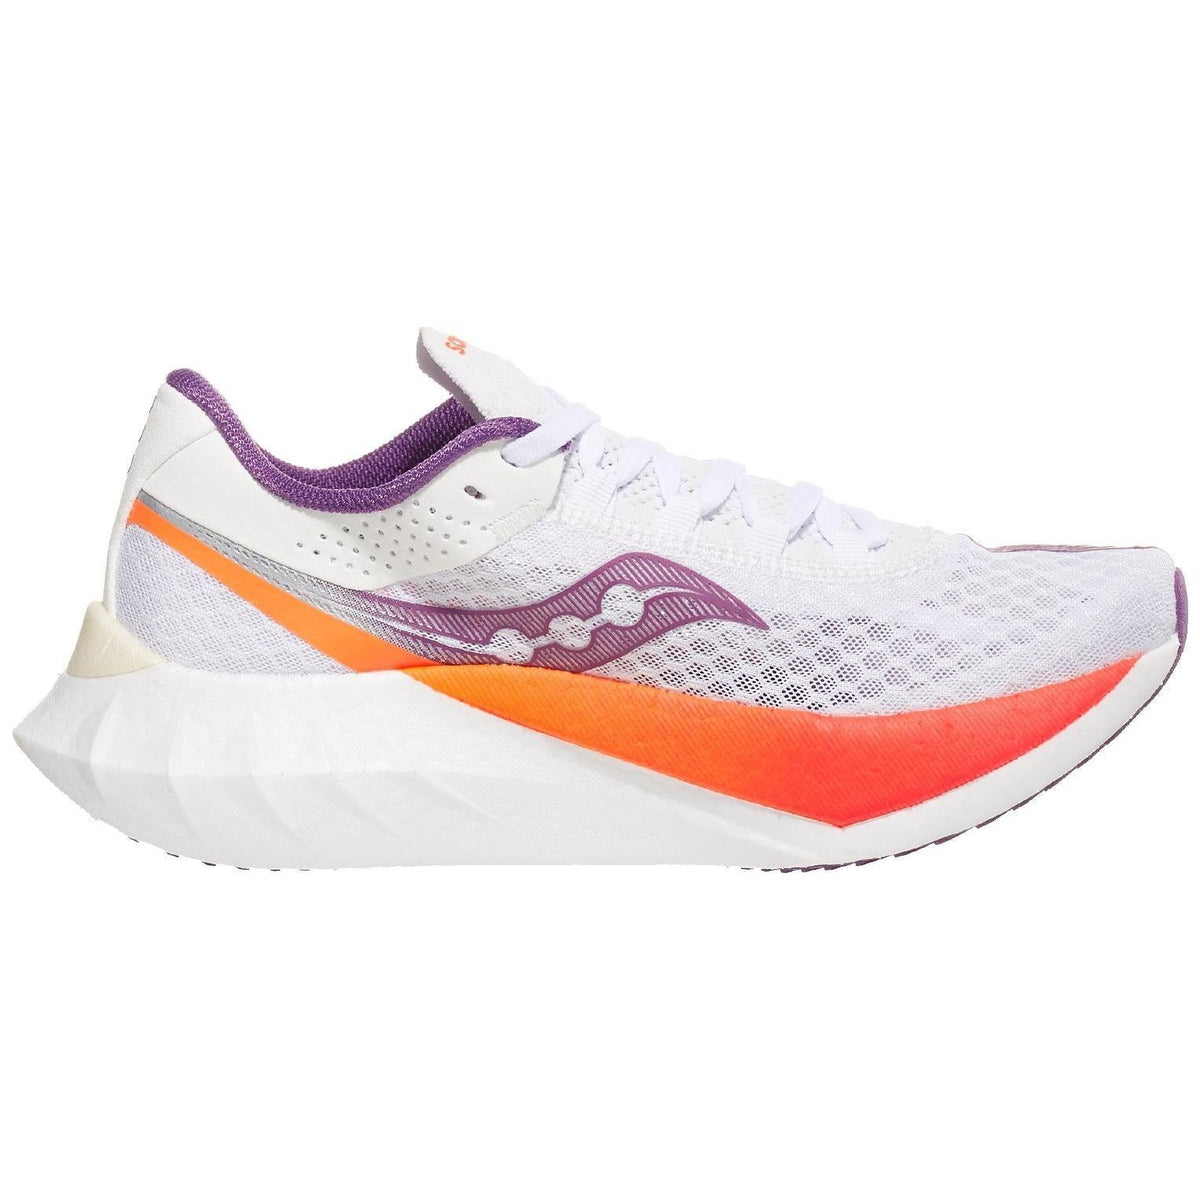 Saucony Endorphin Pro 4 Womens FOOTWEAR - Womens Carbon Plate WHITE/VIOLET